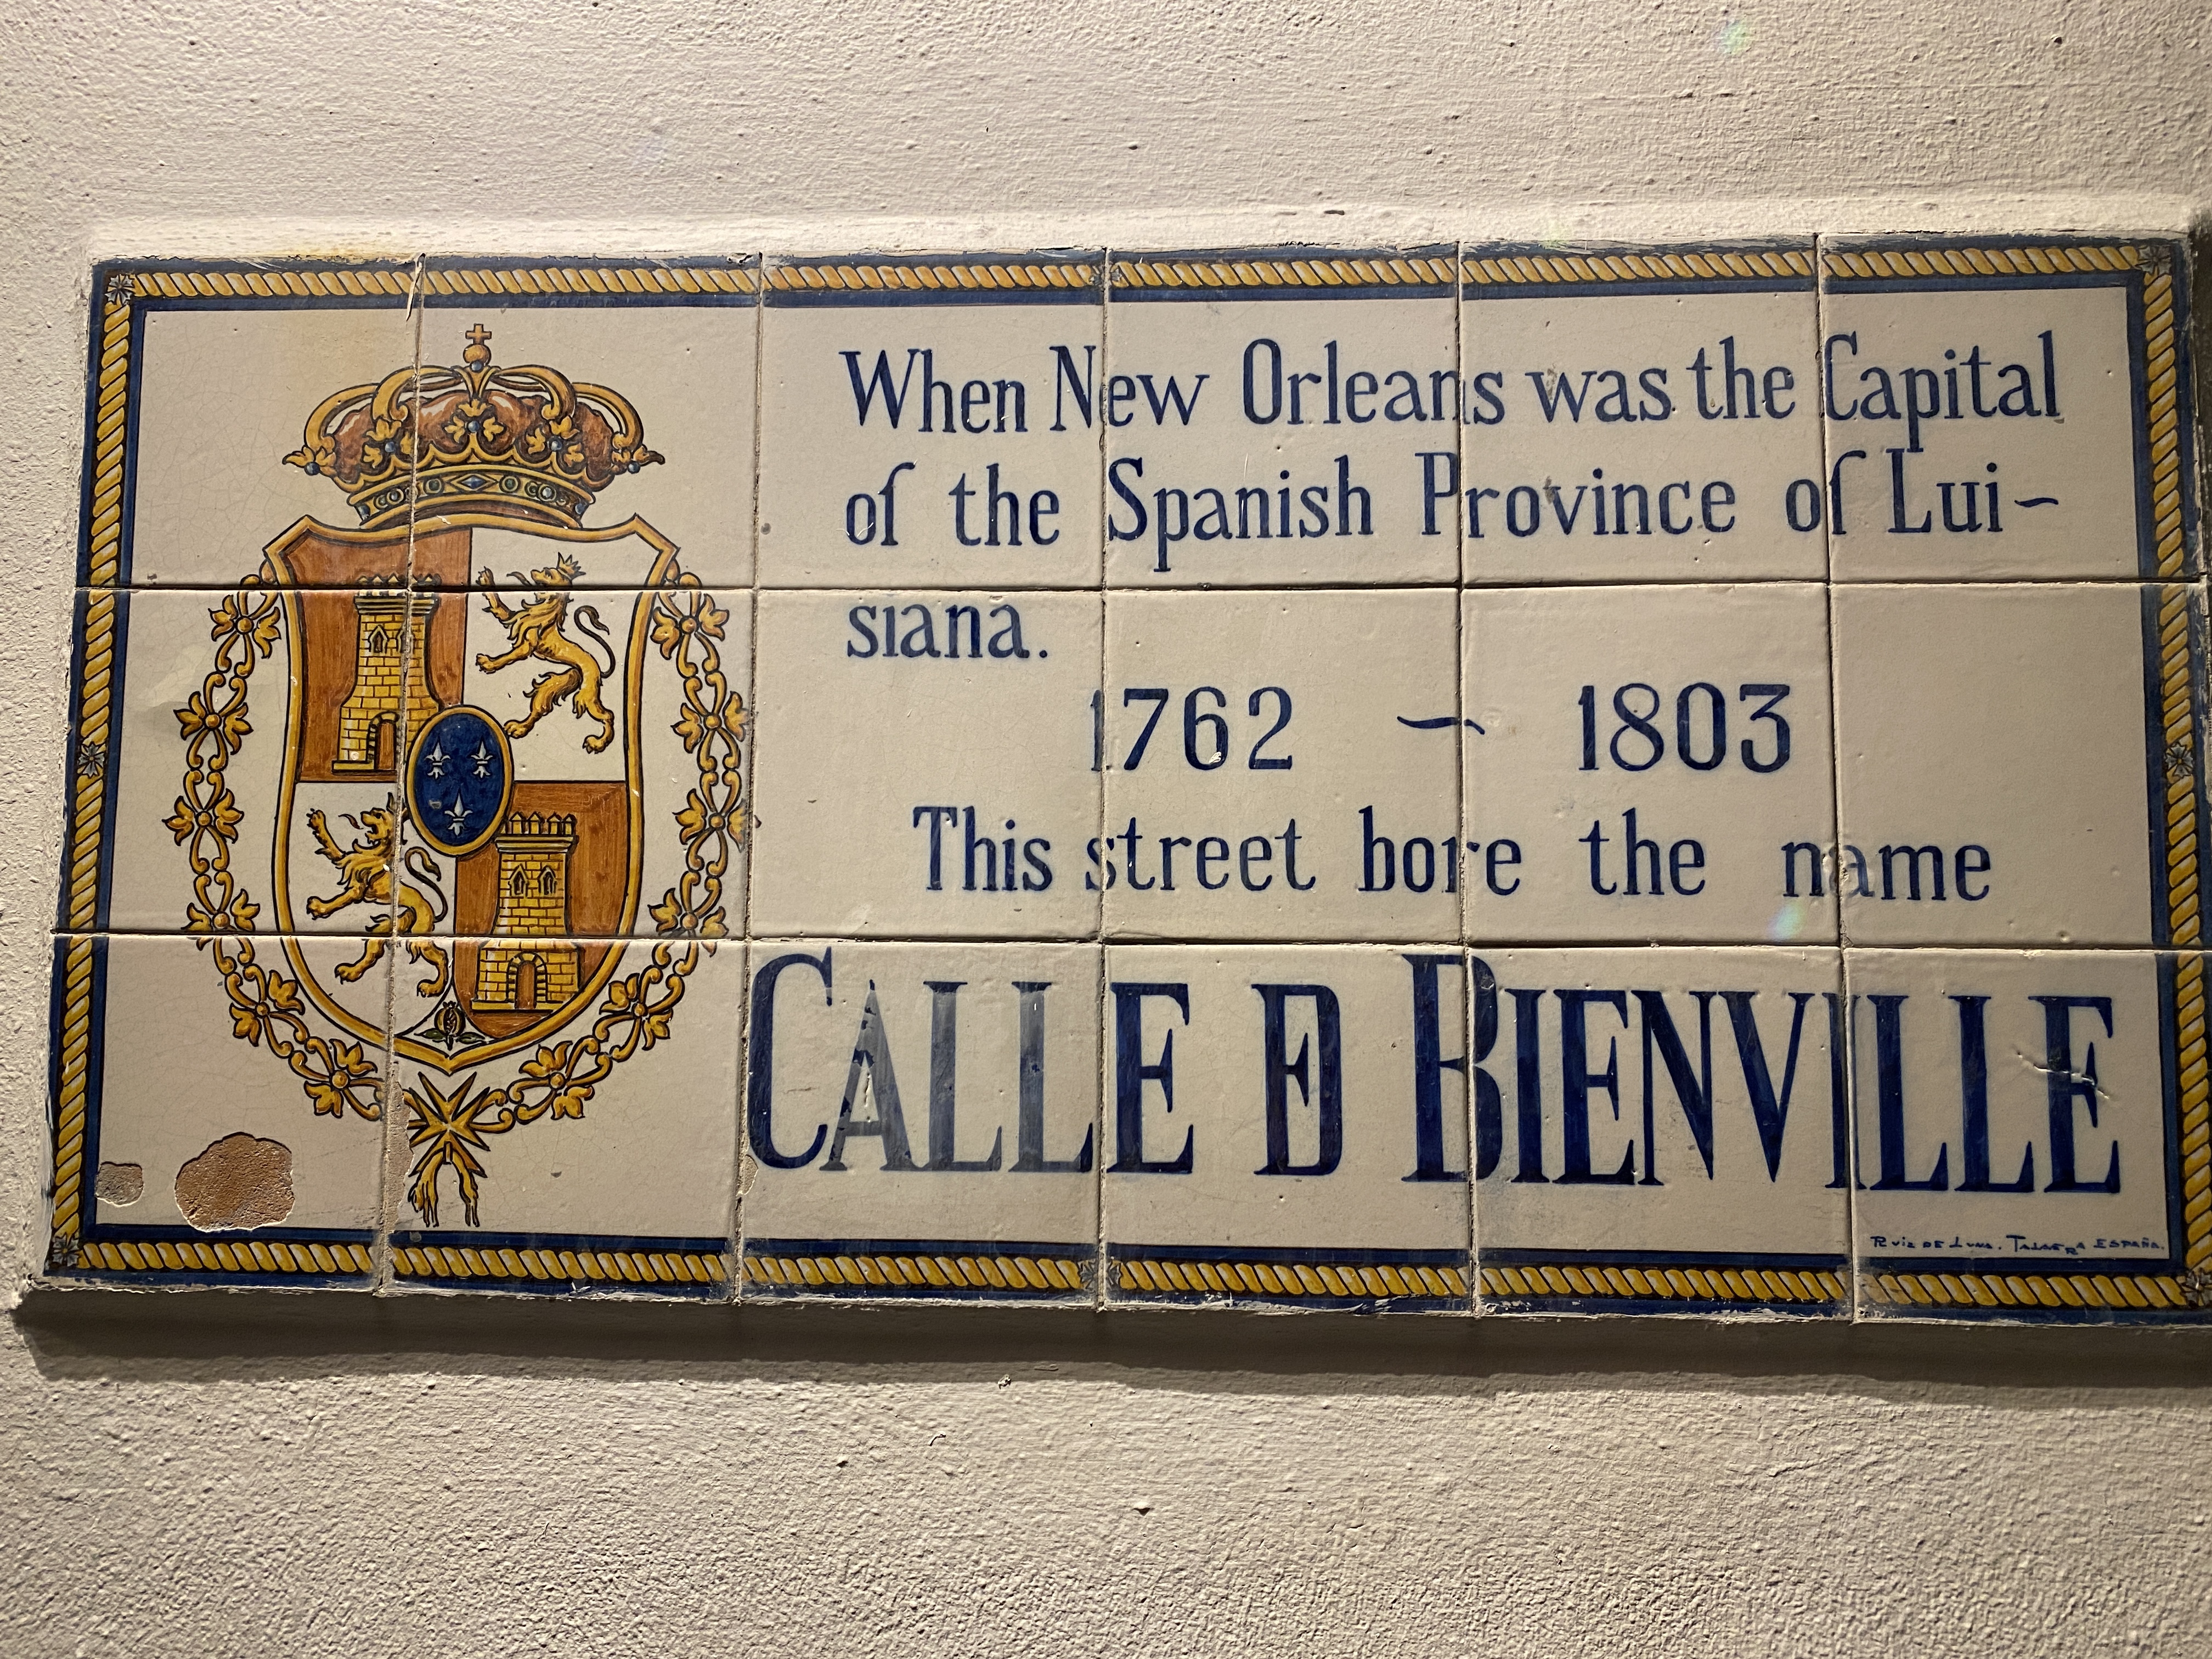 Calle D Beinville tiled street sign in New Orleans, French Quarter. Photo by Sara Rose (2021)